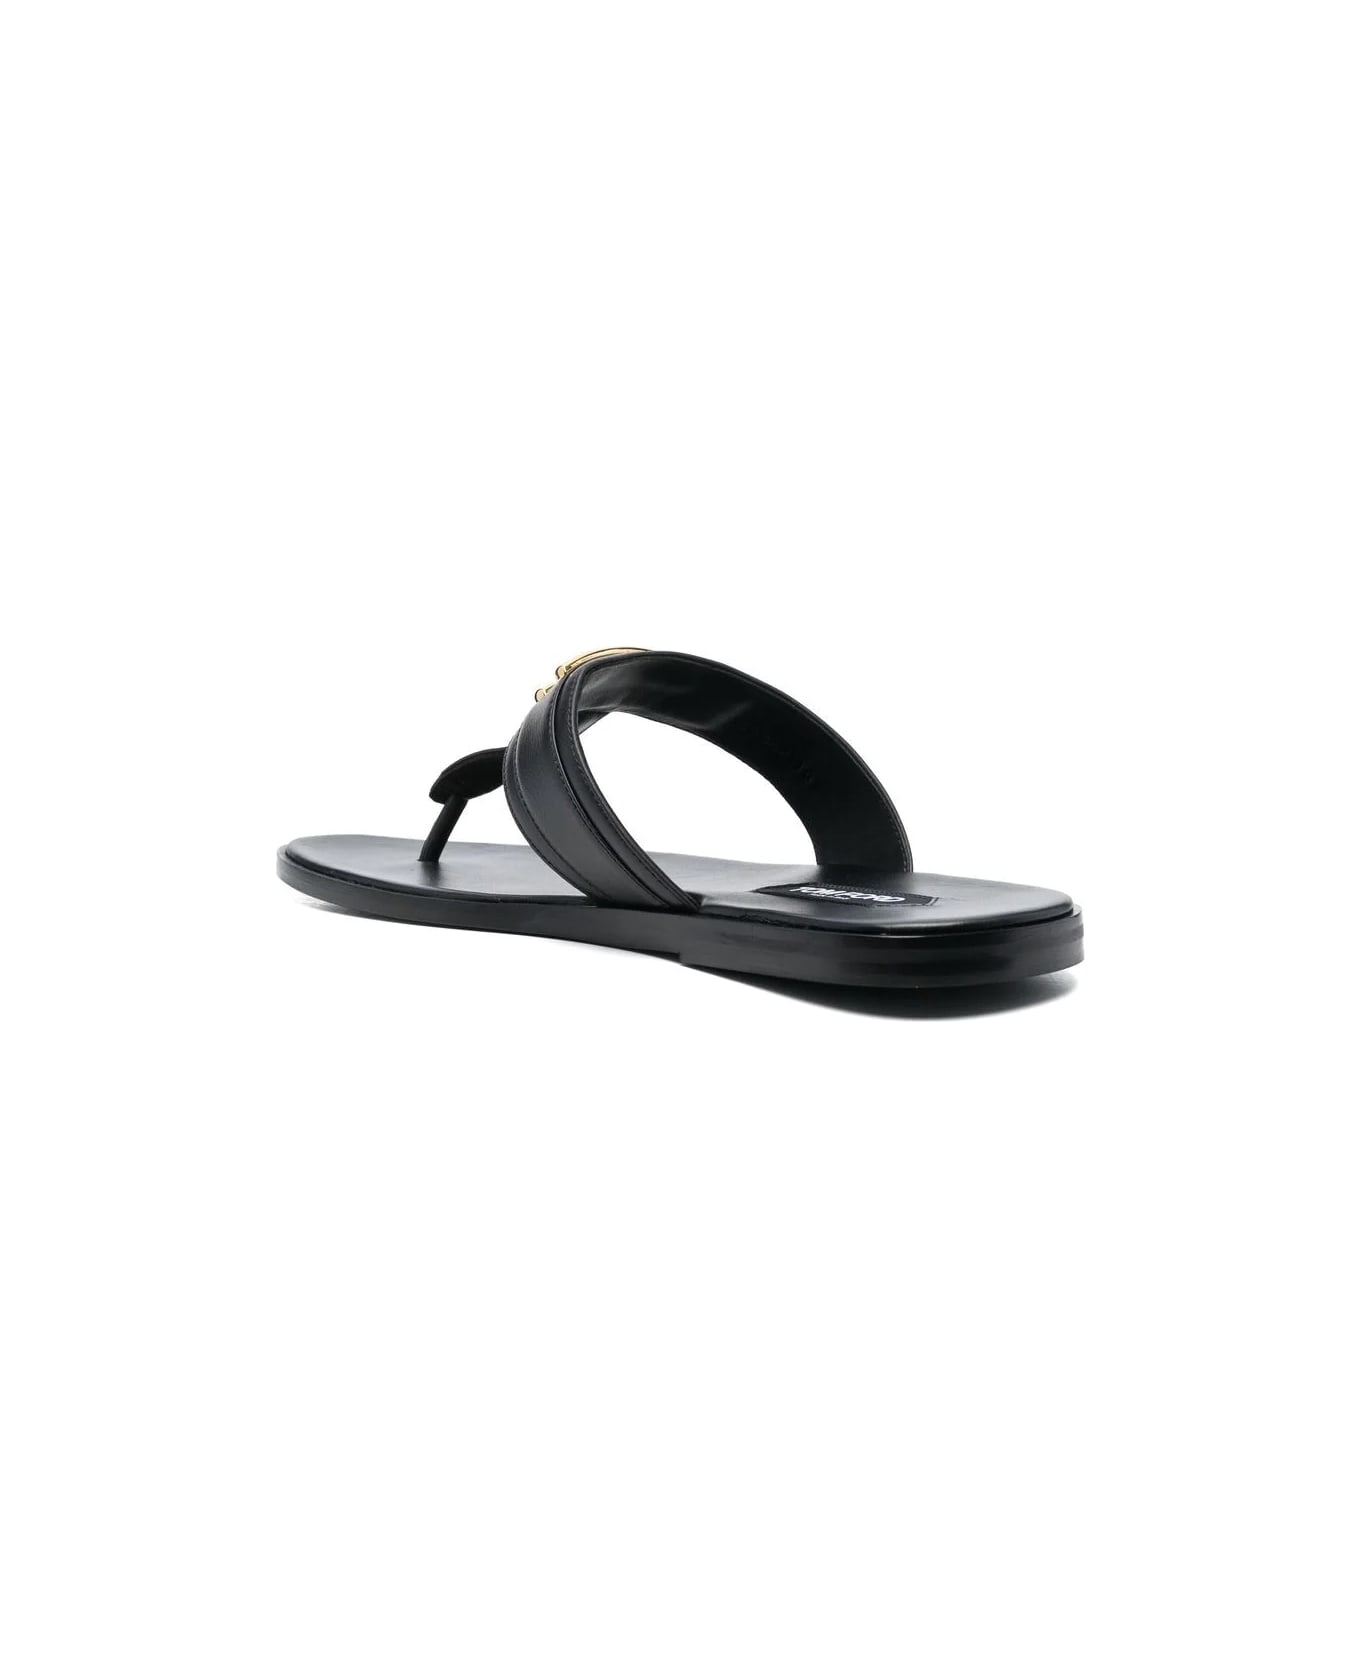 Tom Ford Smooth Leather Sandals - Black